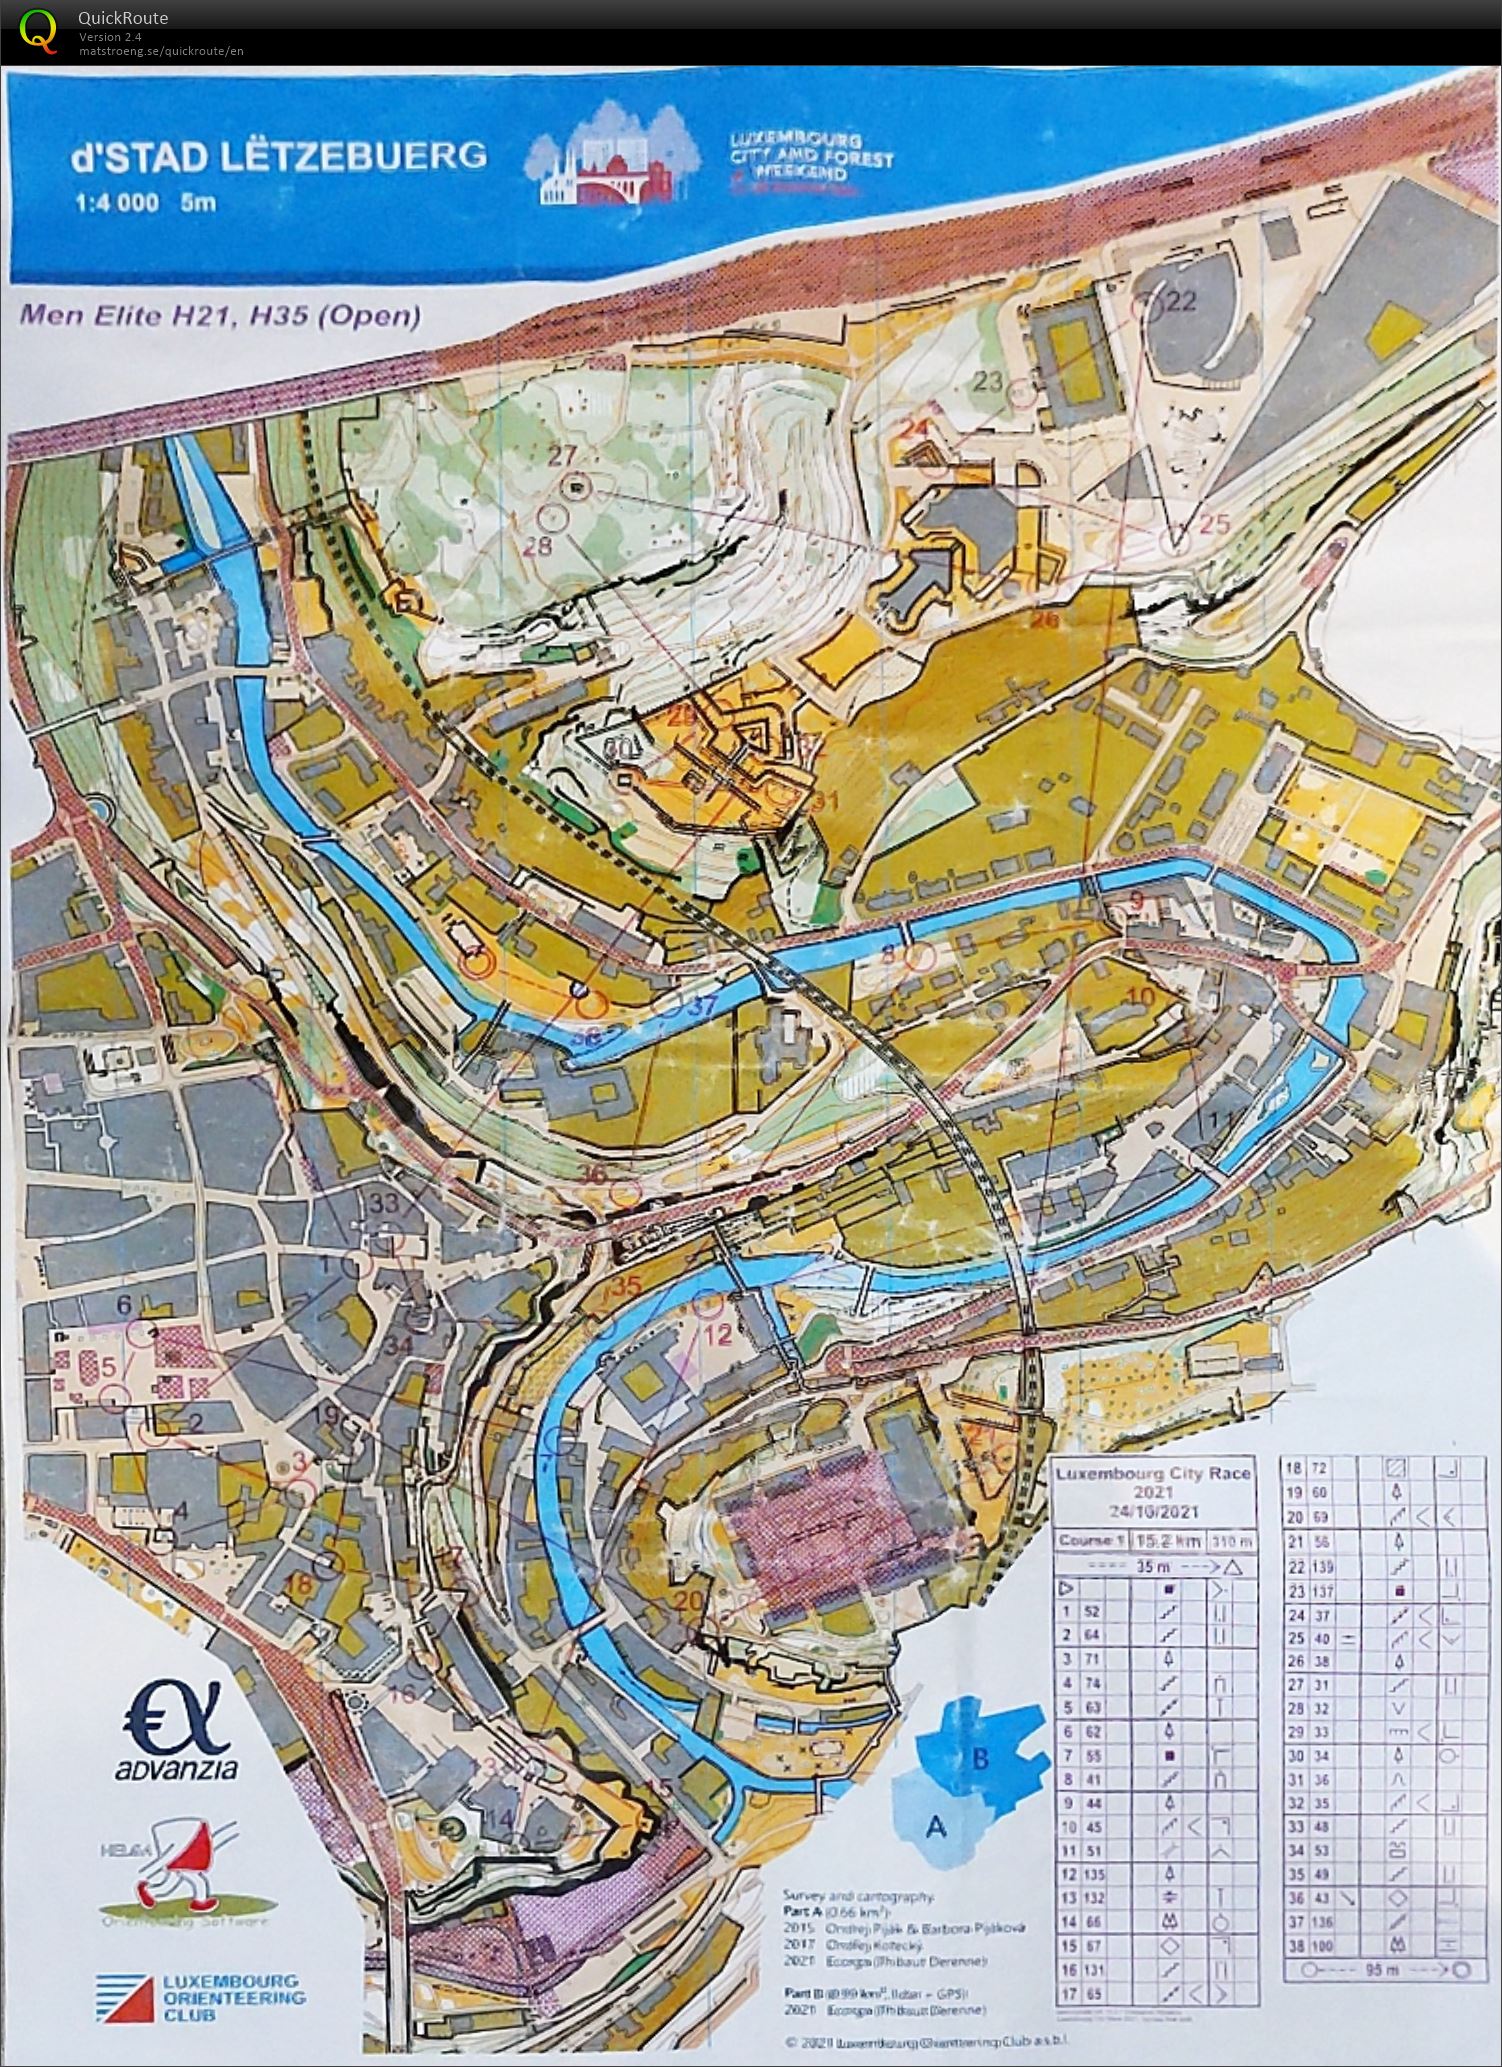 Luxembourg City Race (24.10.2021)